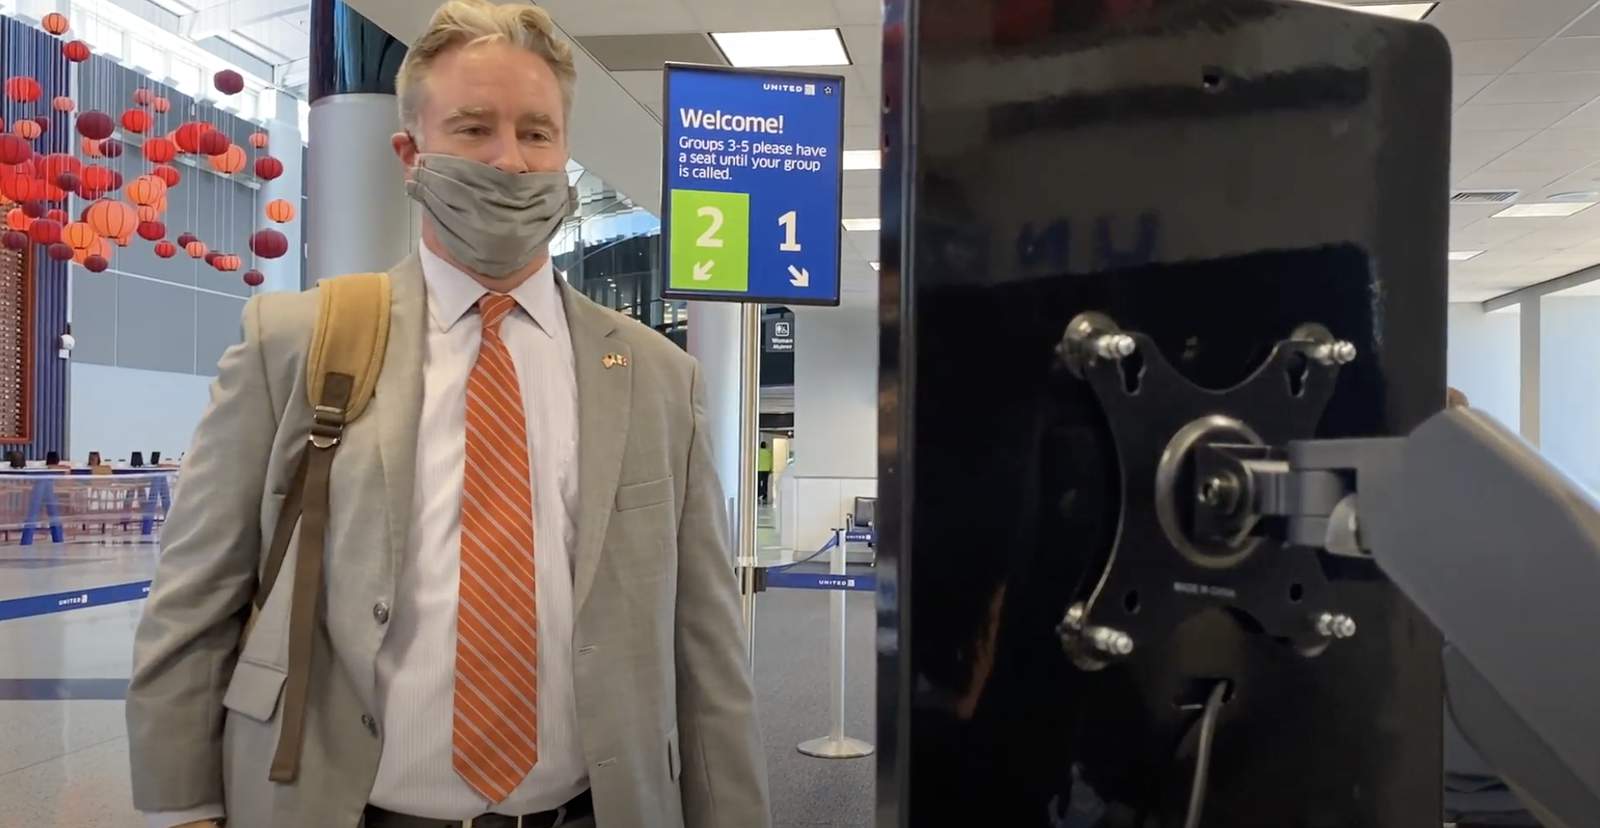 IAH launches facial recognition in Terminal E to help minimize exposure for travelers